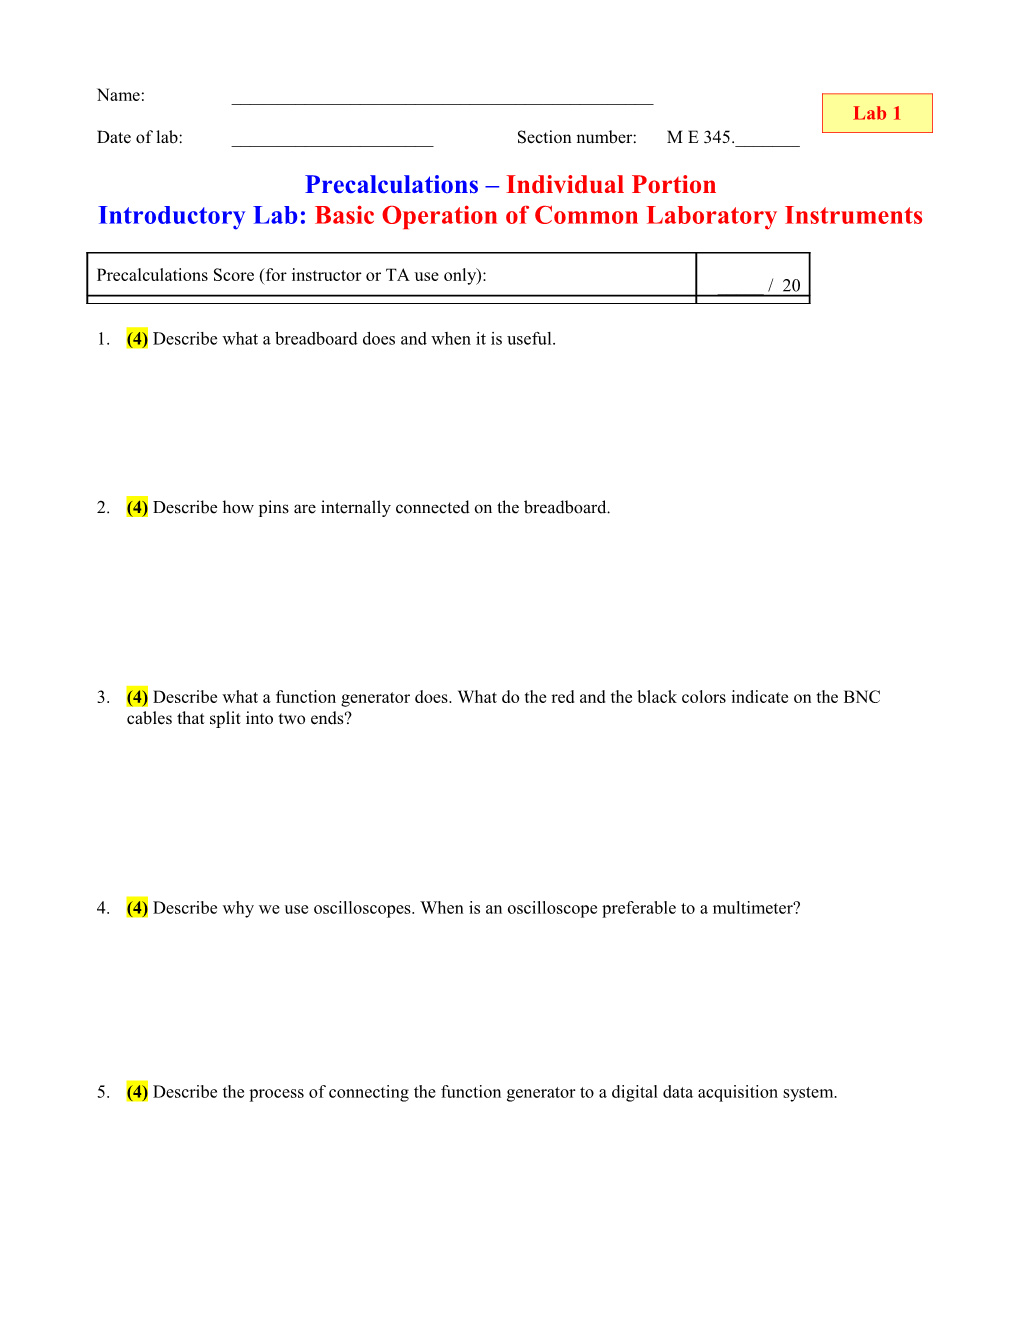 Cover Page for Precalculations Individual Portion